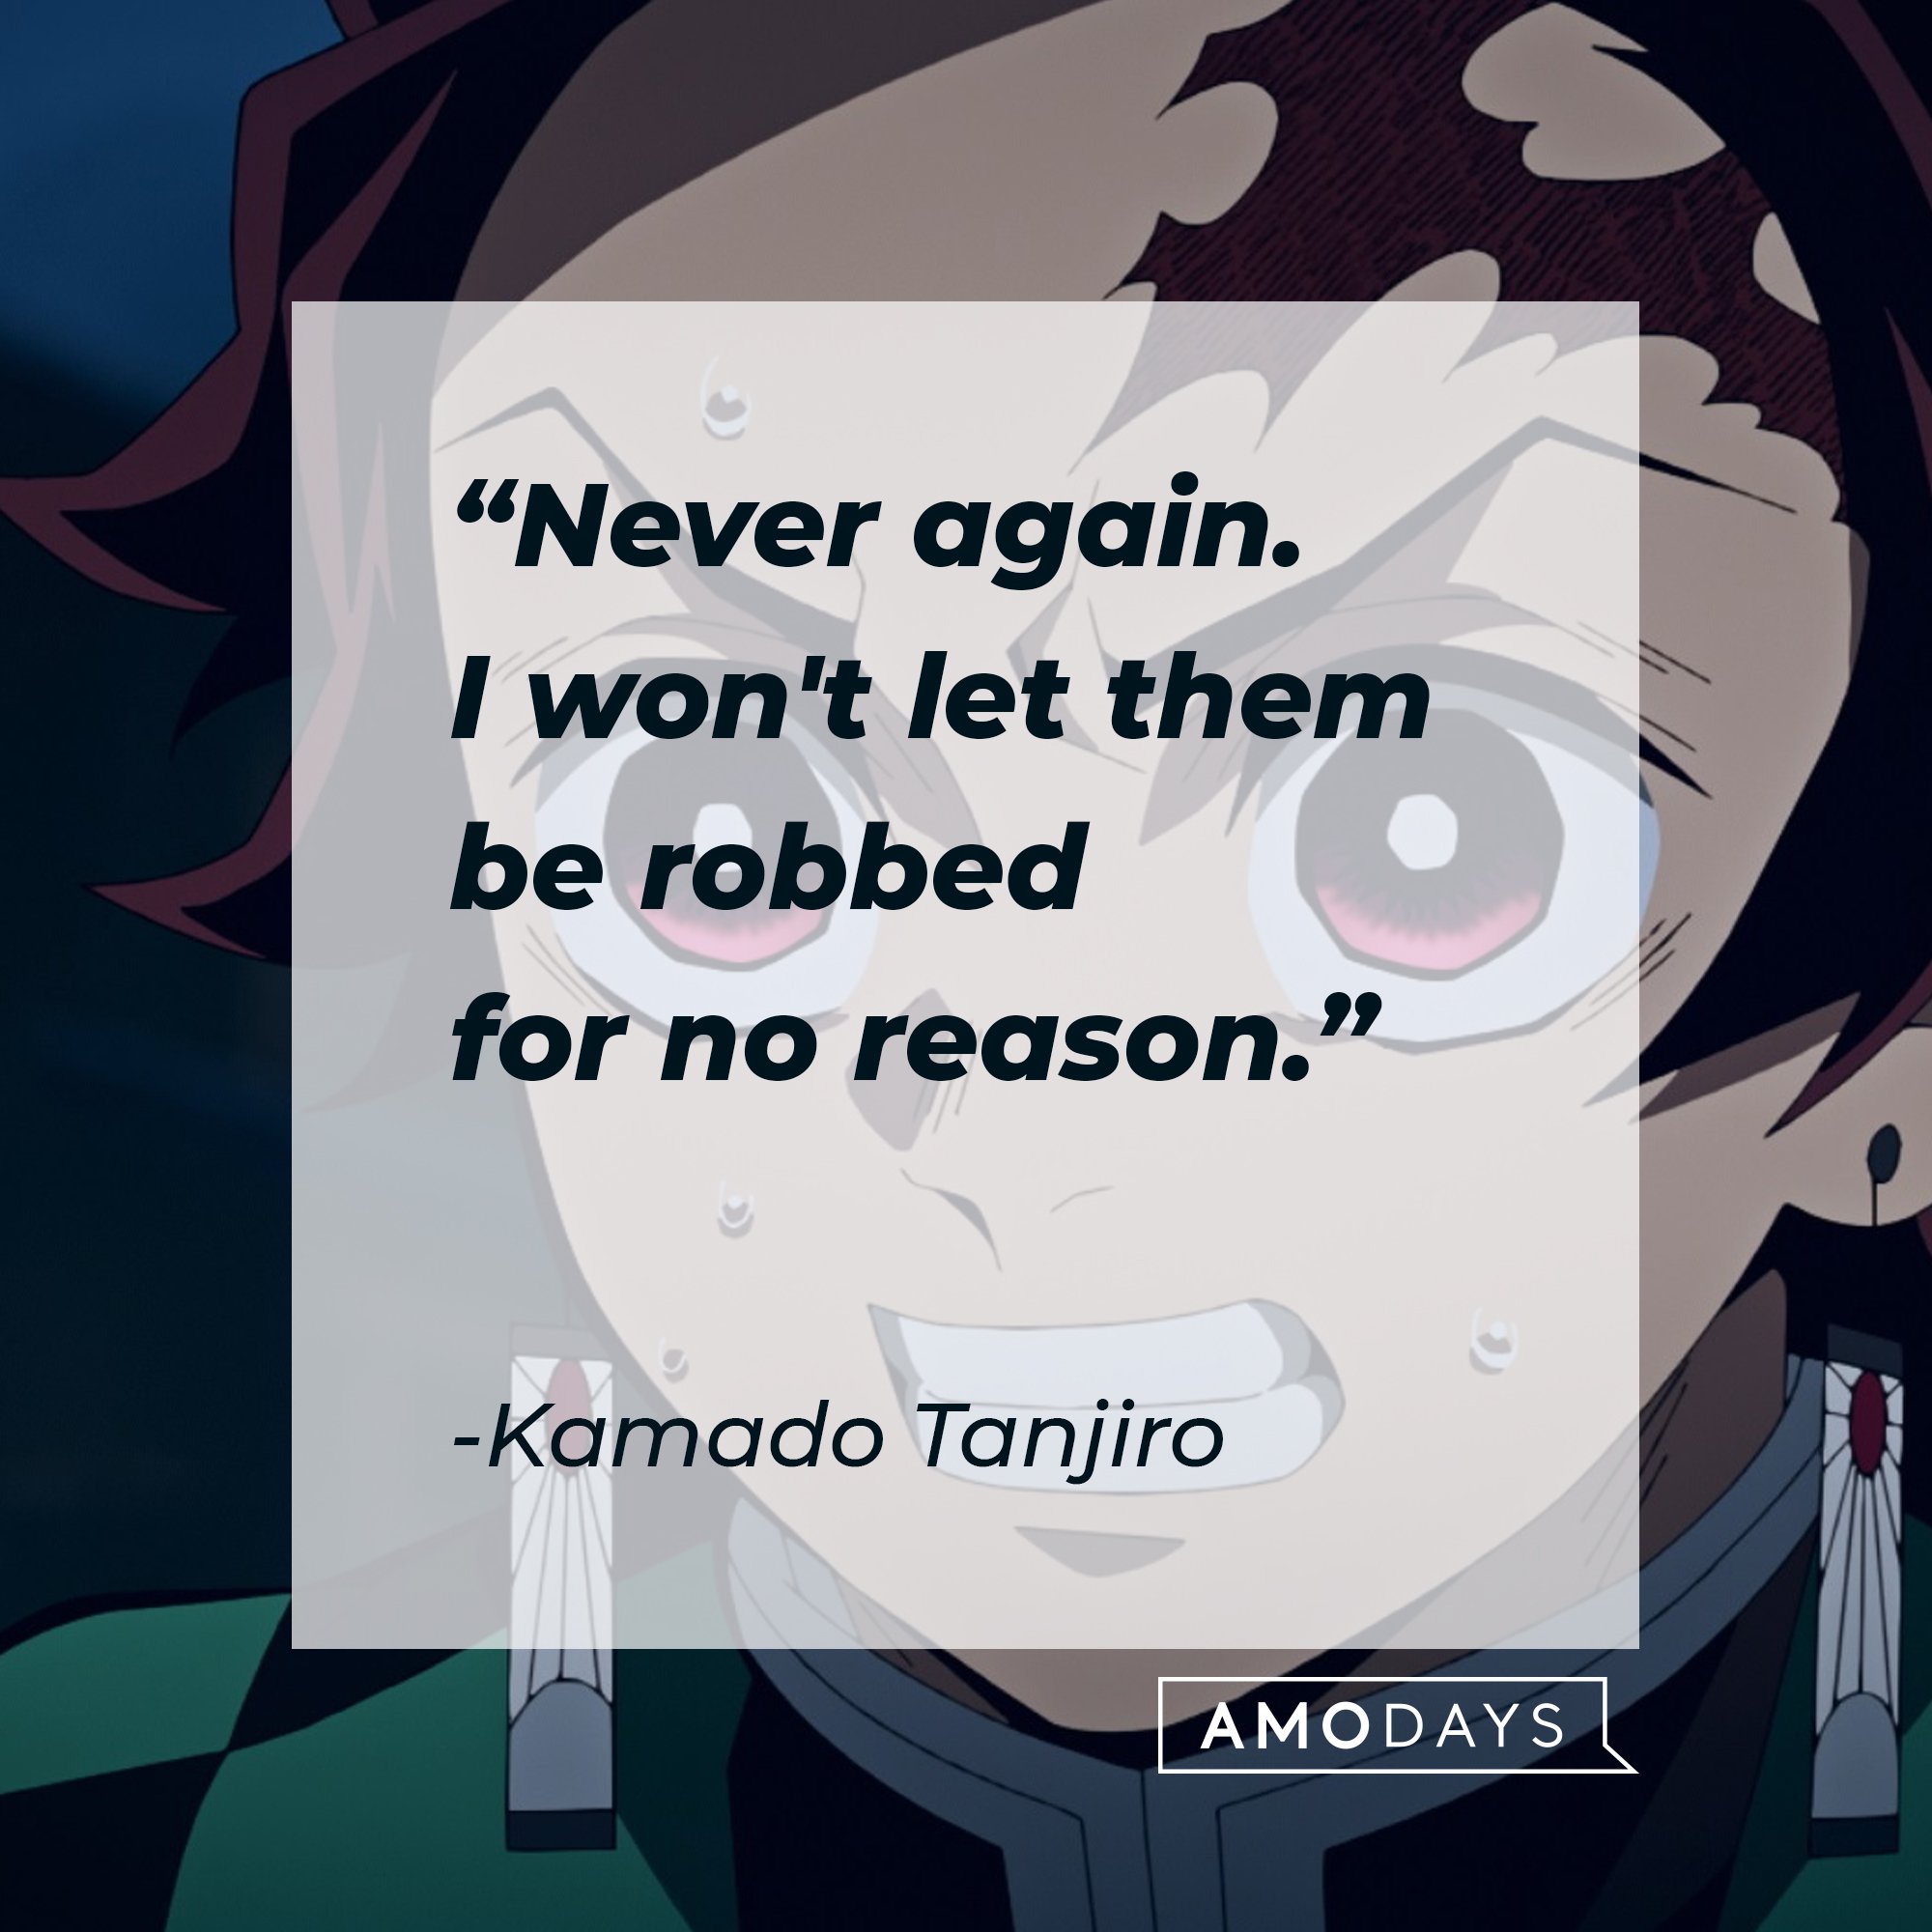 Kamado Tanjiro’s quote: "Never again. I won't let them be robbed for no reason."  | Image: AmoDays